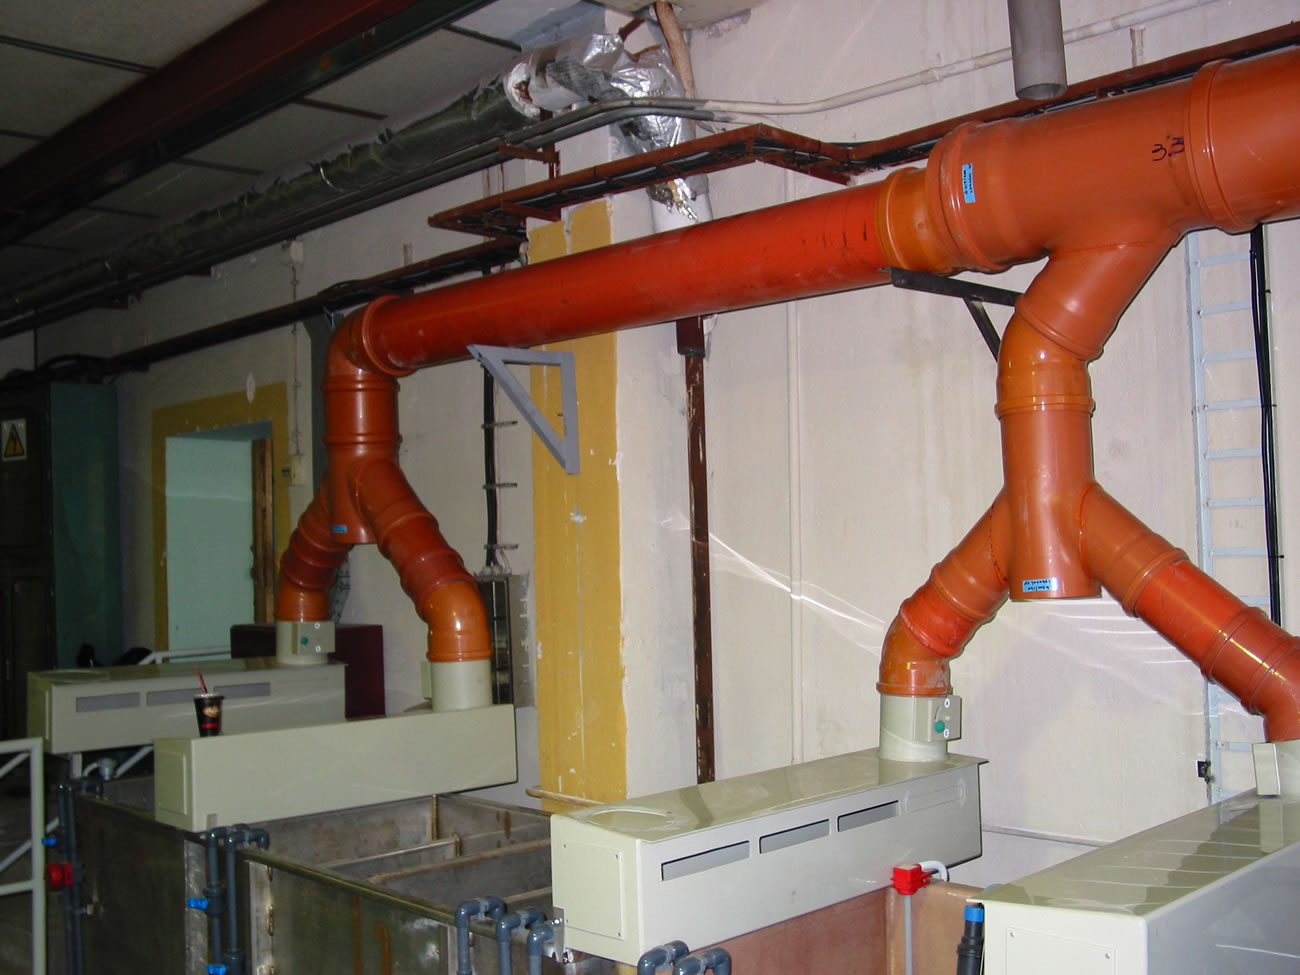 Plastic hoods and piping for suction of corrosive gases from metal plating baths